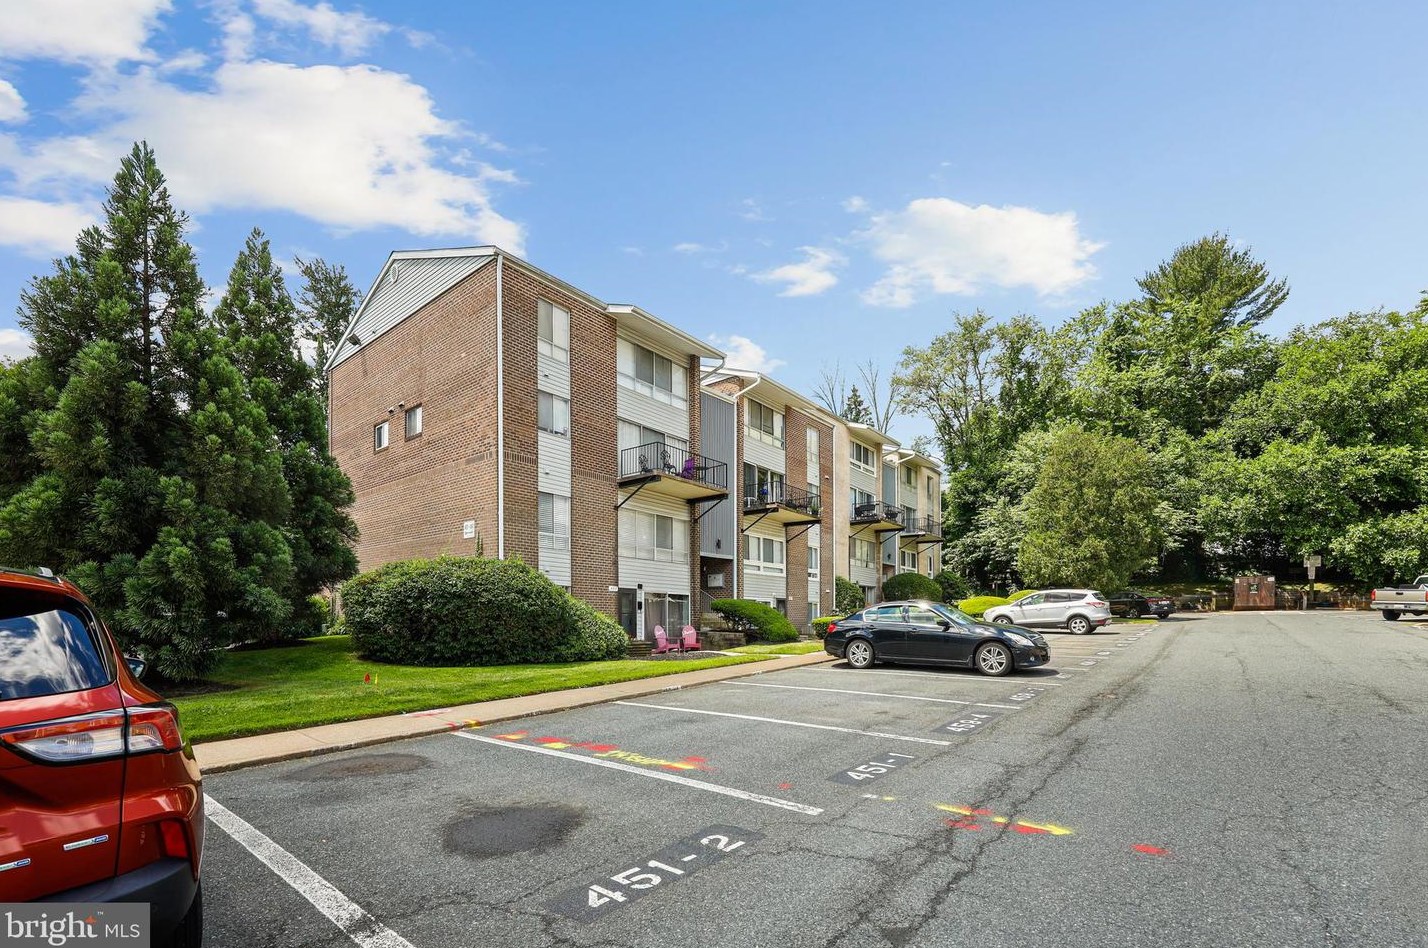 459 Moores Mill Rd #459-4, Bel Air, MD 21014